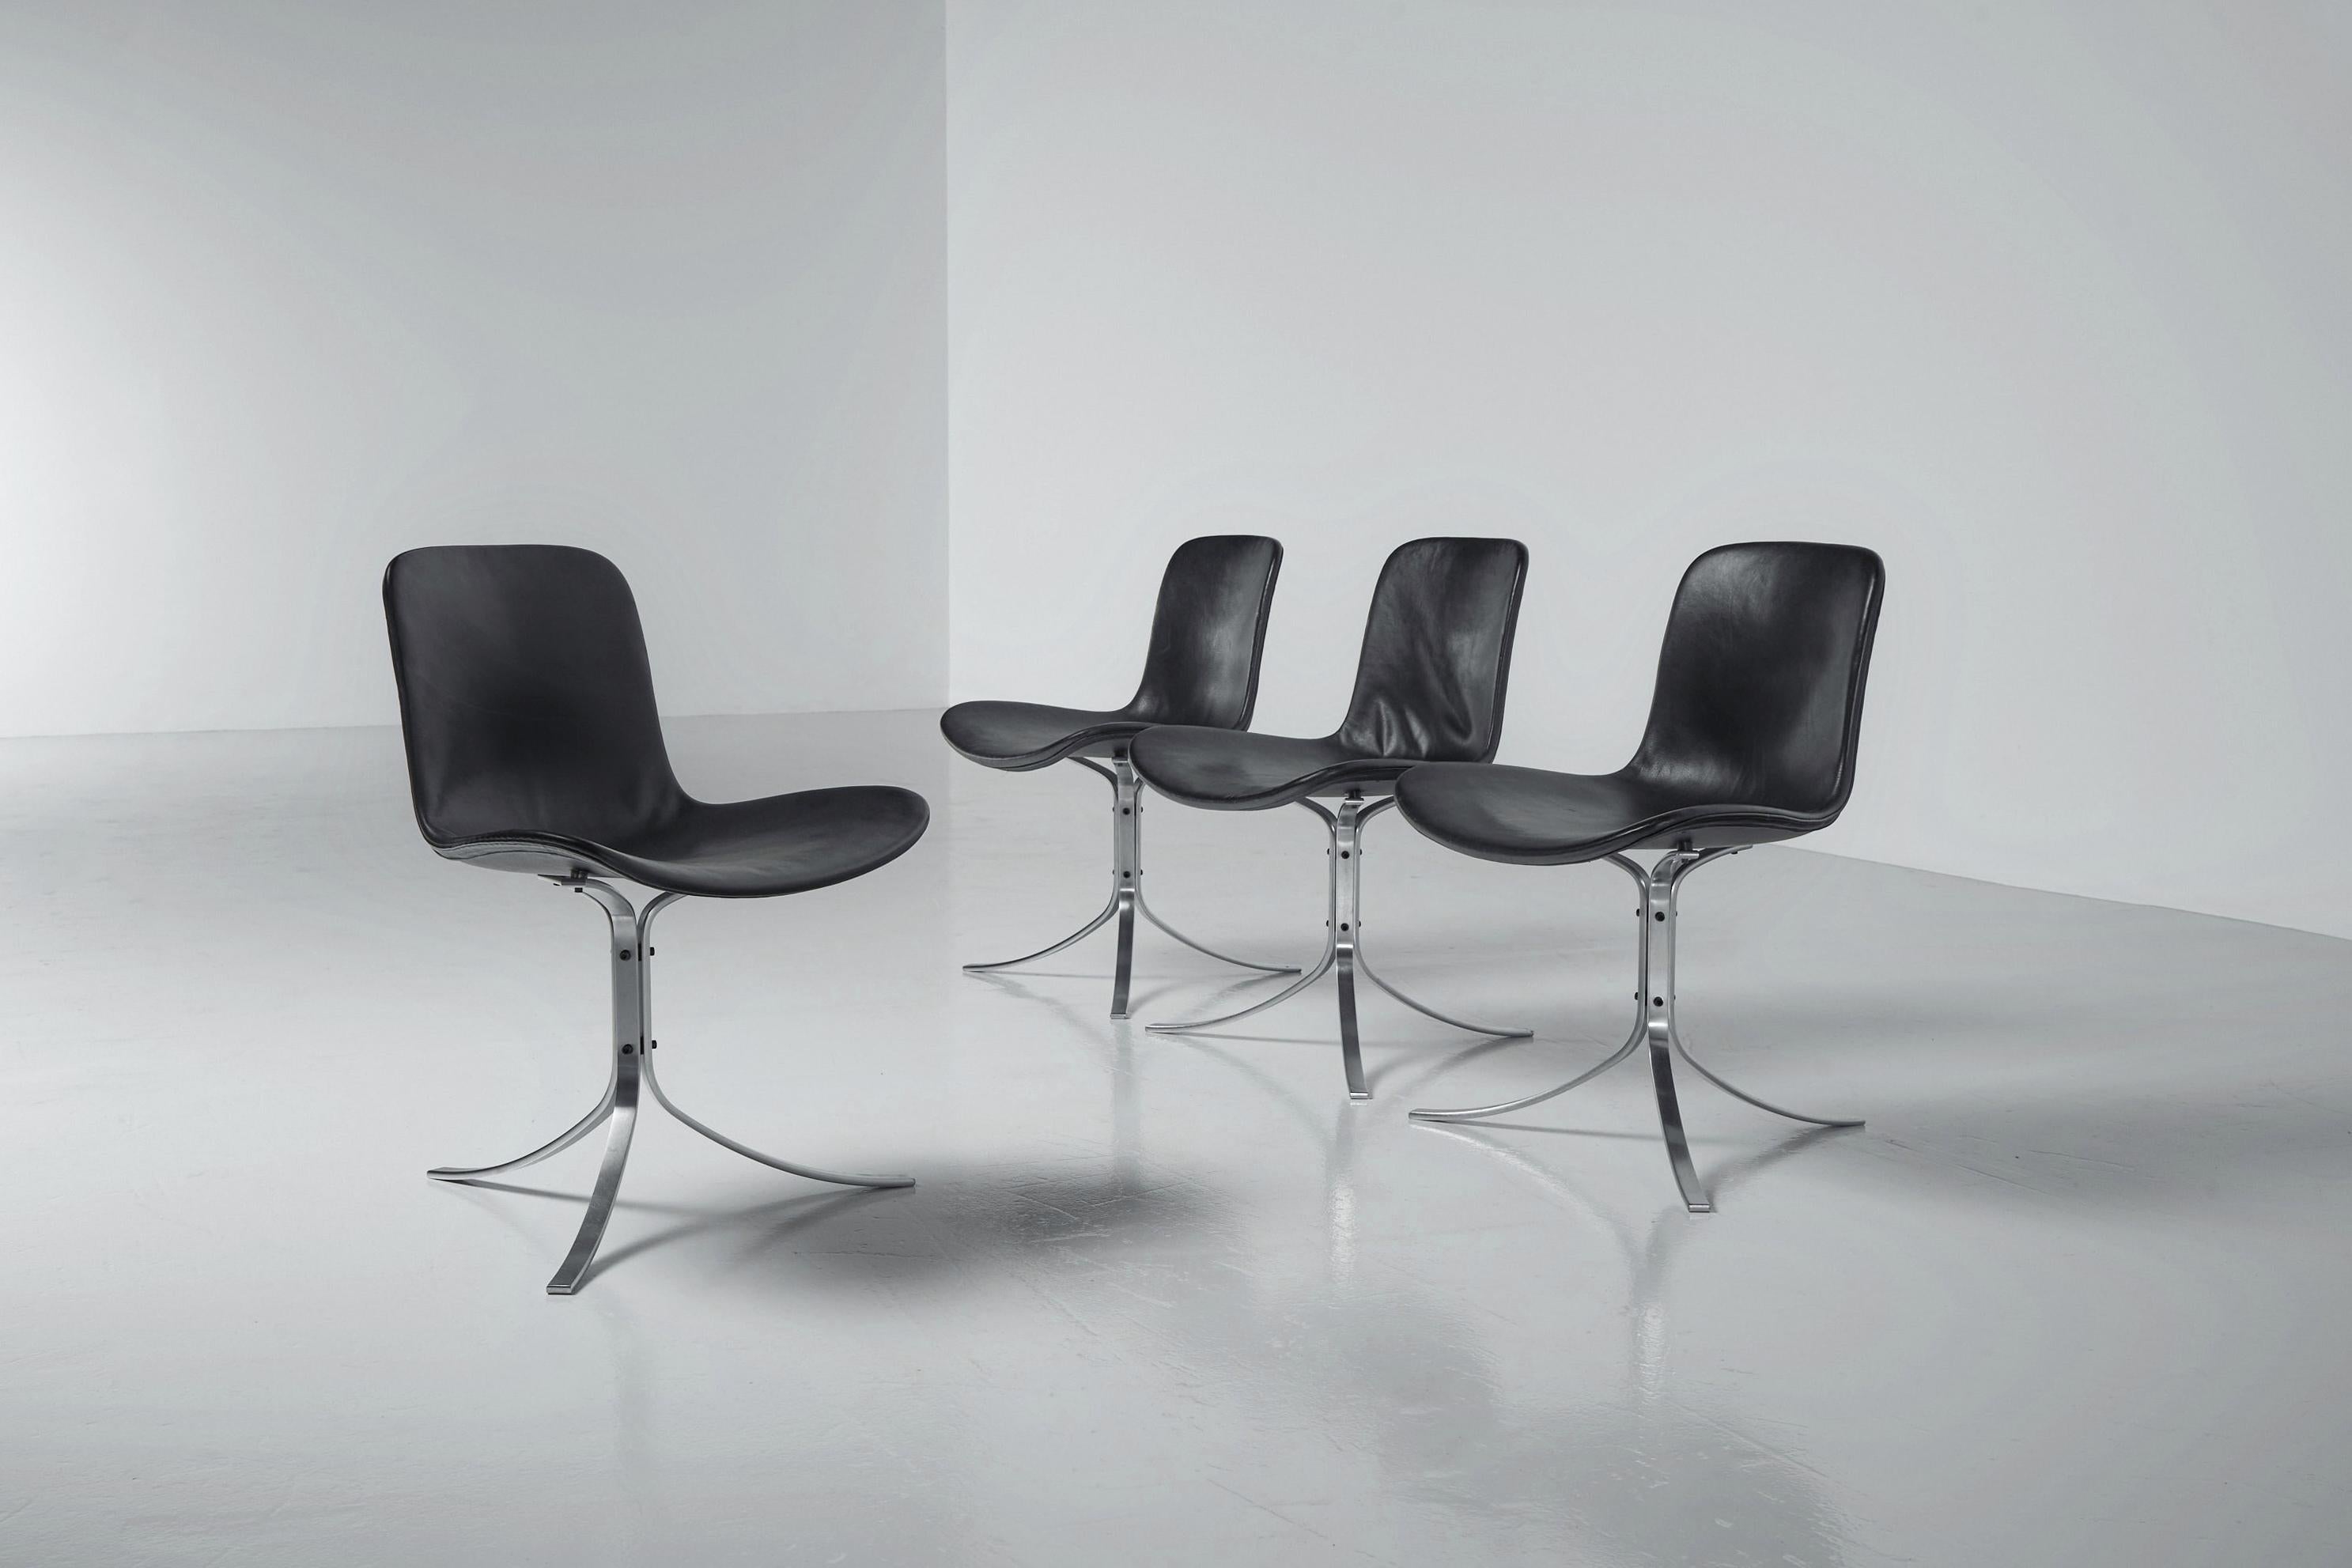 Beautiful set of 4 original PK9 tulip chairs designed by Poul Kjaerholm and manufactured by Ejvind Kold Christensen, Denmark 1961. This is for a rare and early set of 4 from EKC production, this was the first production before Fritz Hansen took the